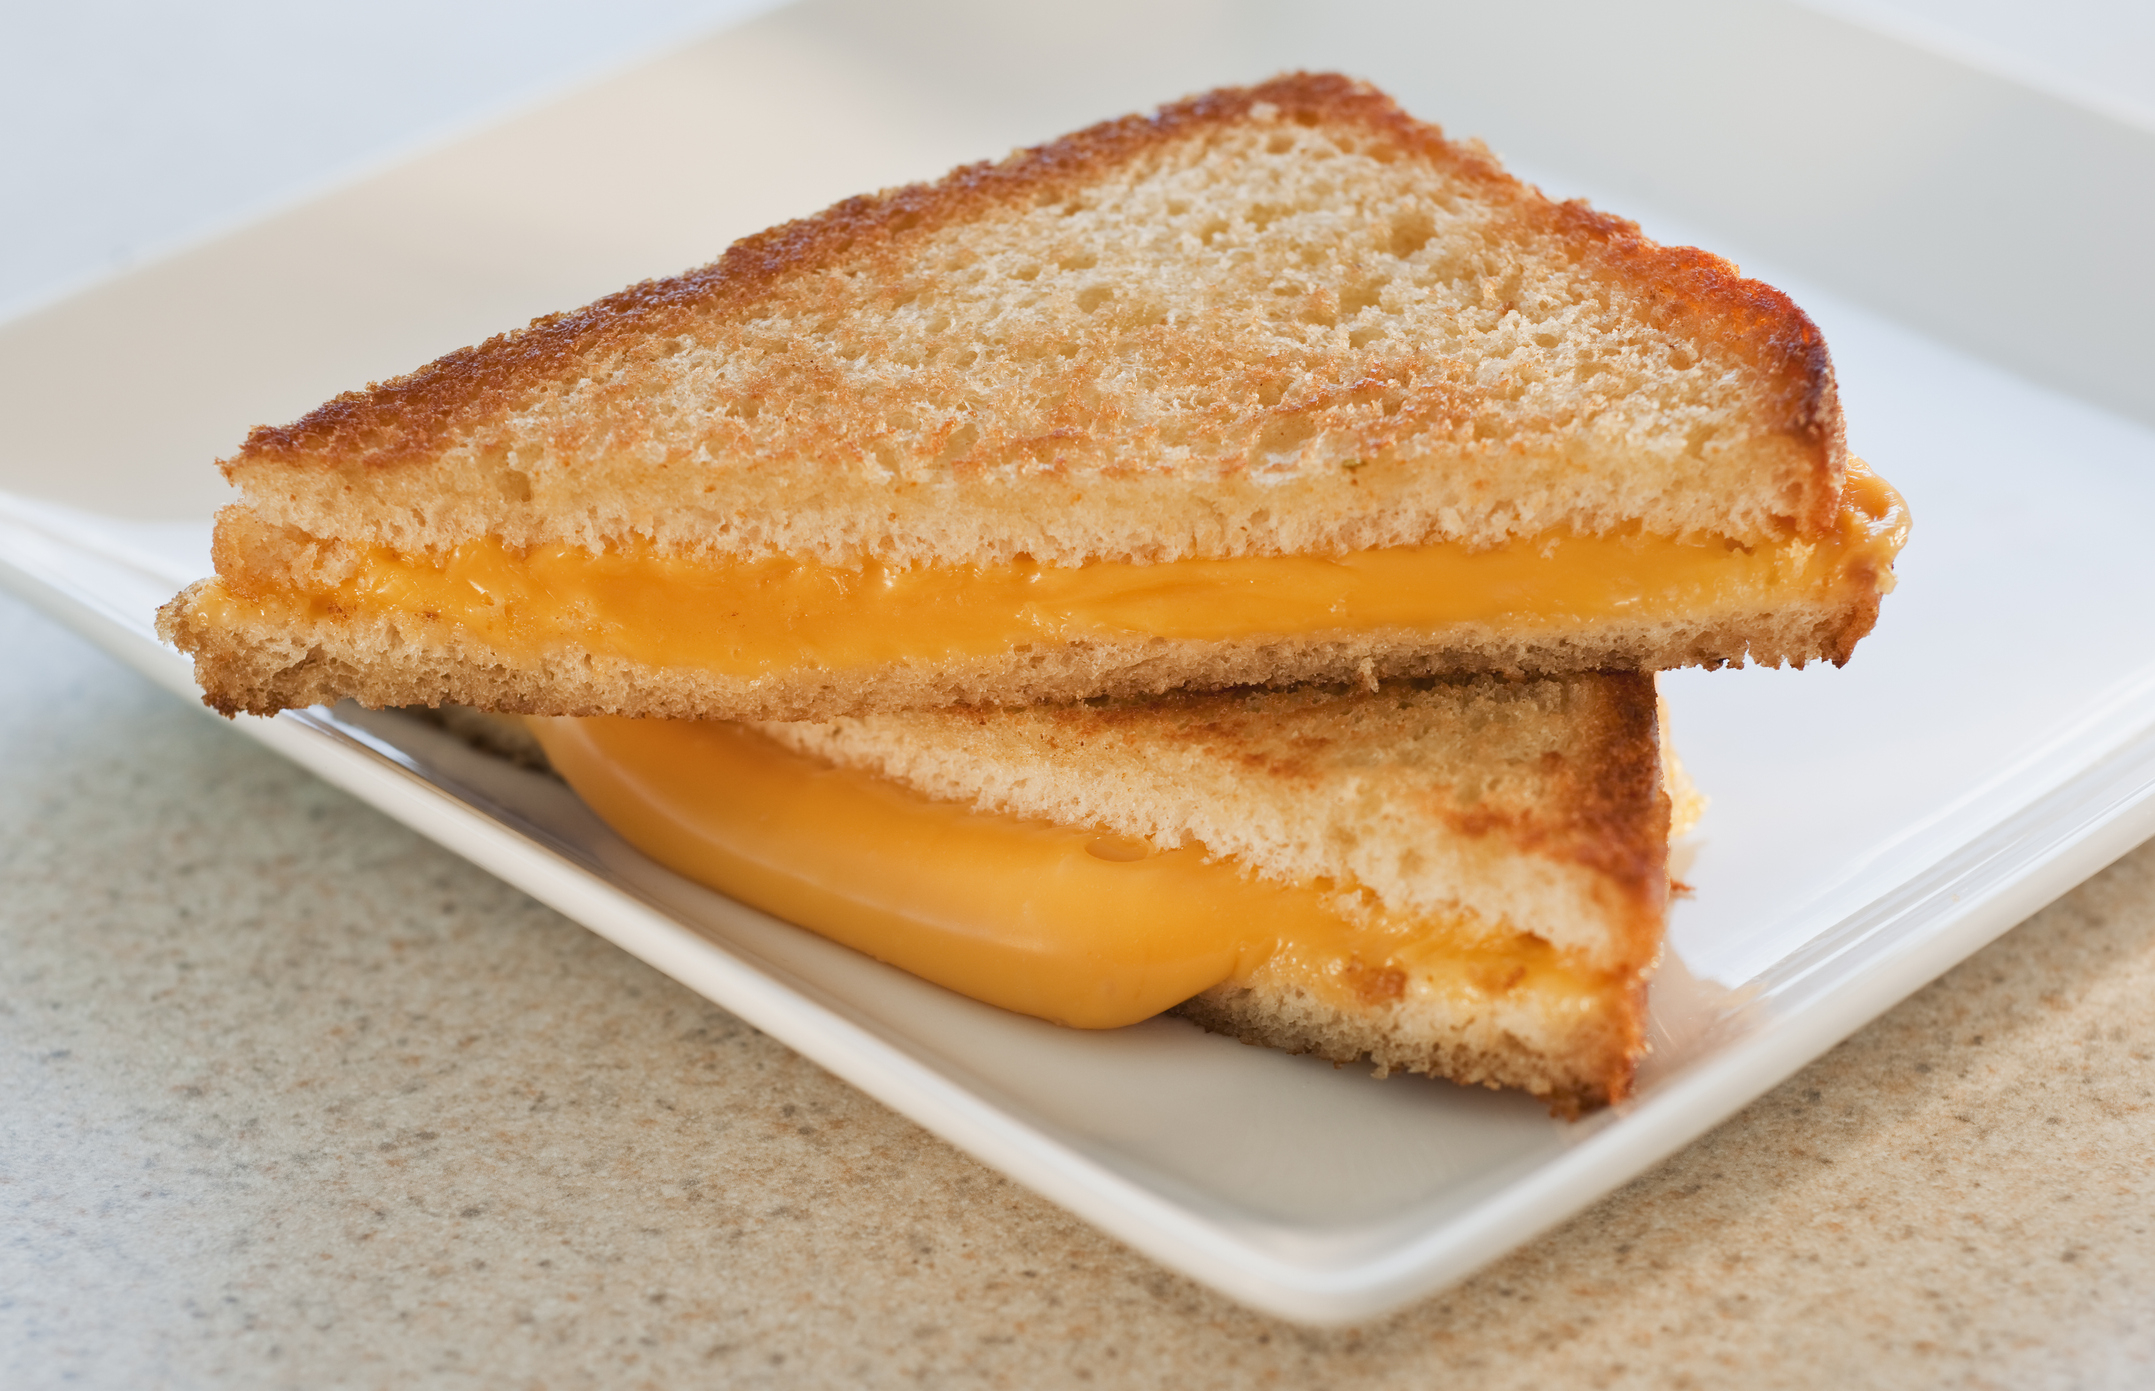 a simple grilled cheese made with white bread and american cheese on a plate